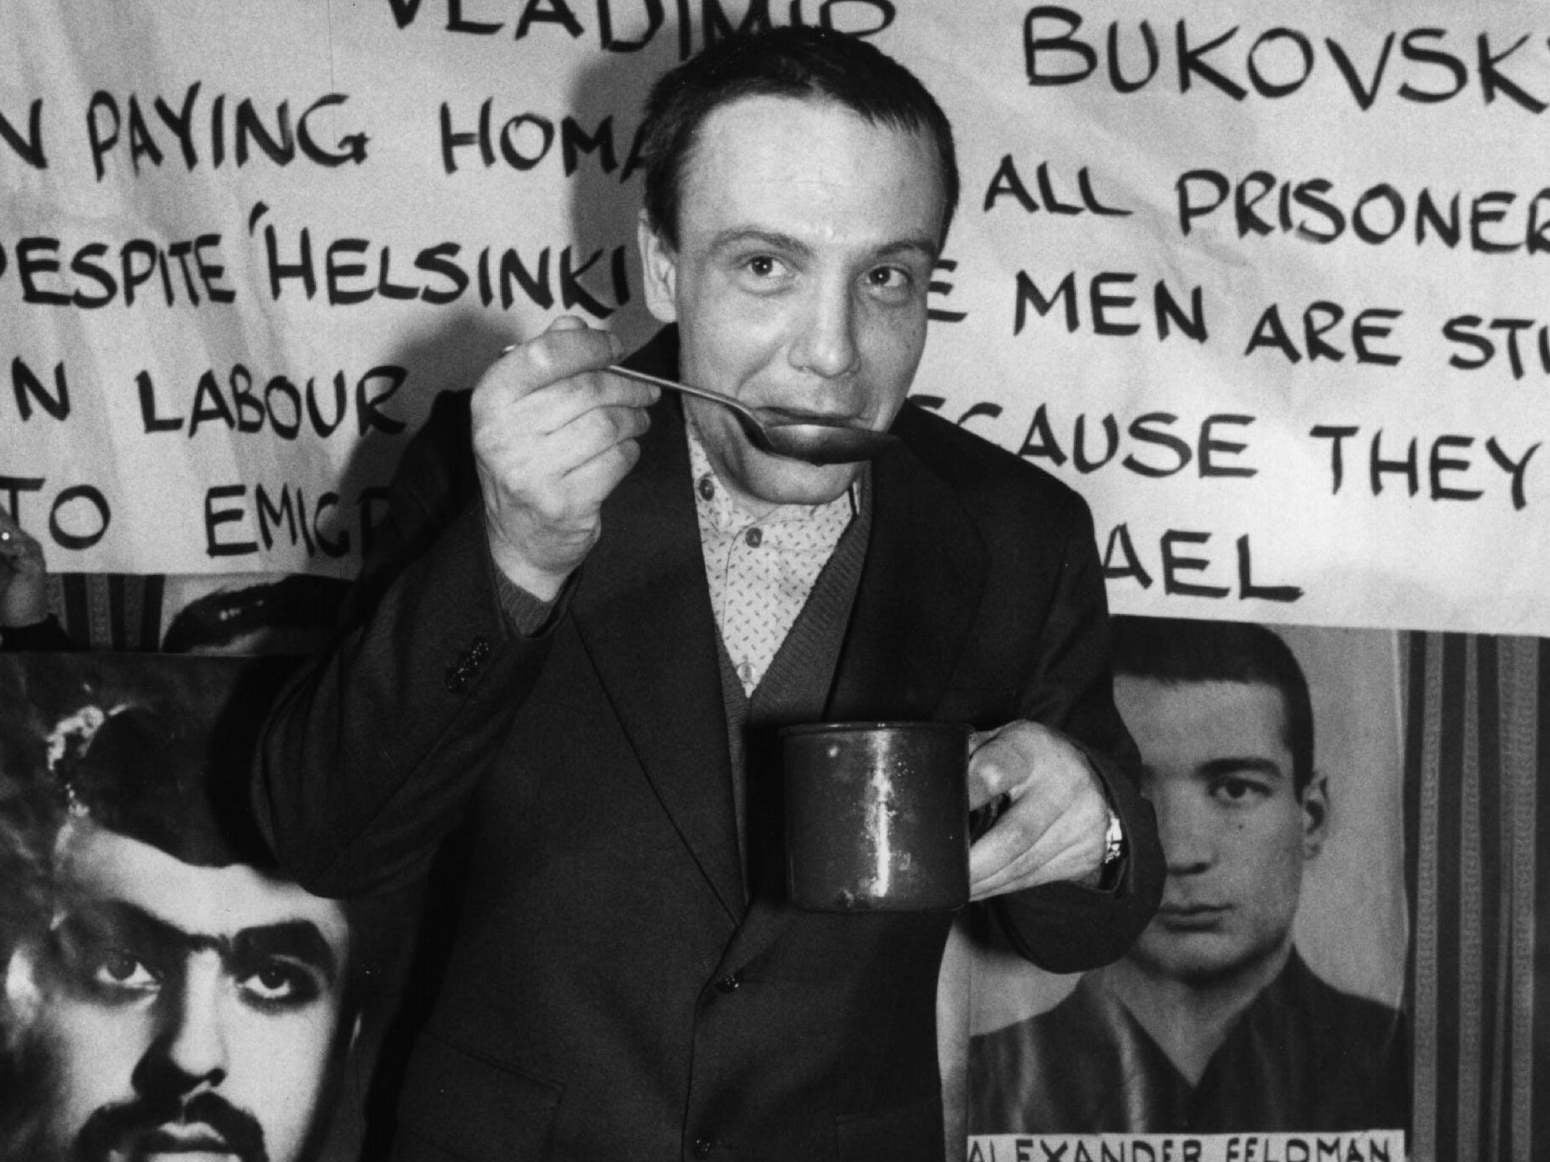 Bukovsky in 1977, soon after he was released from prison: surrounded by posters of prisoners of conscience, he tastes a symbolic meal to pay homage to those still held